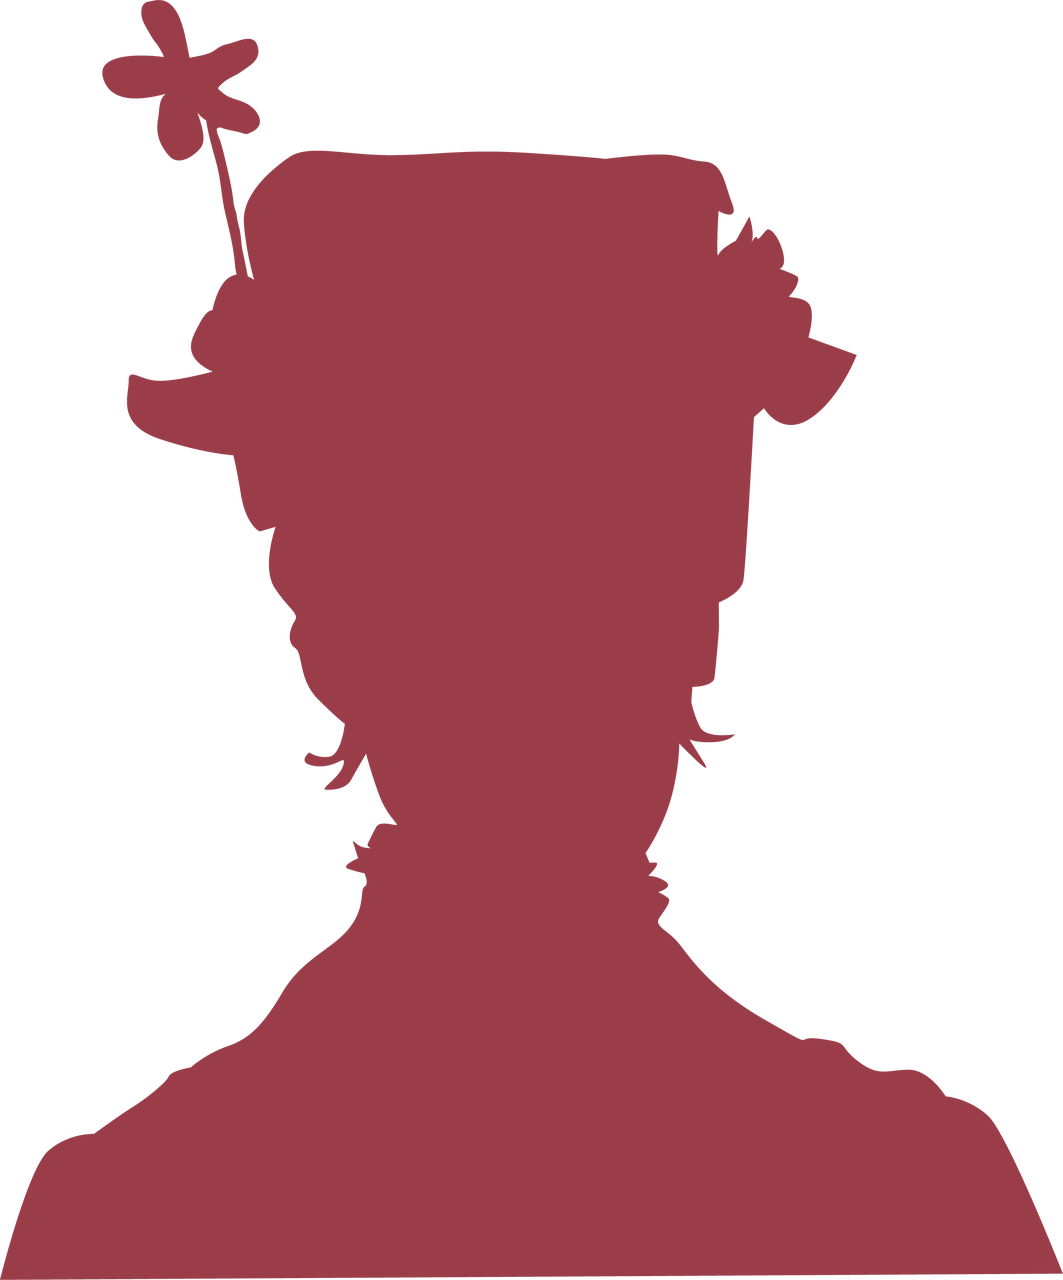 Mary Poppins Silhouette SVG Cut File